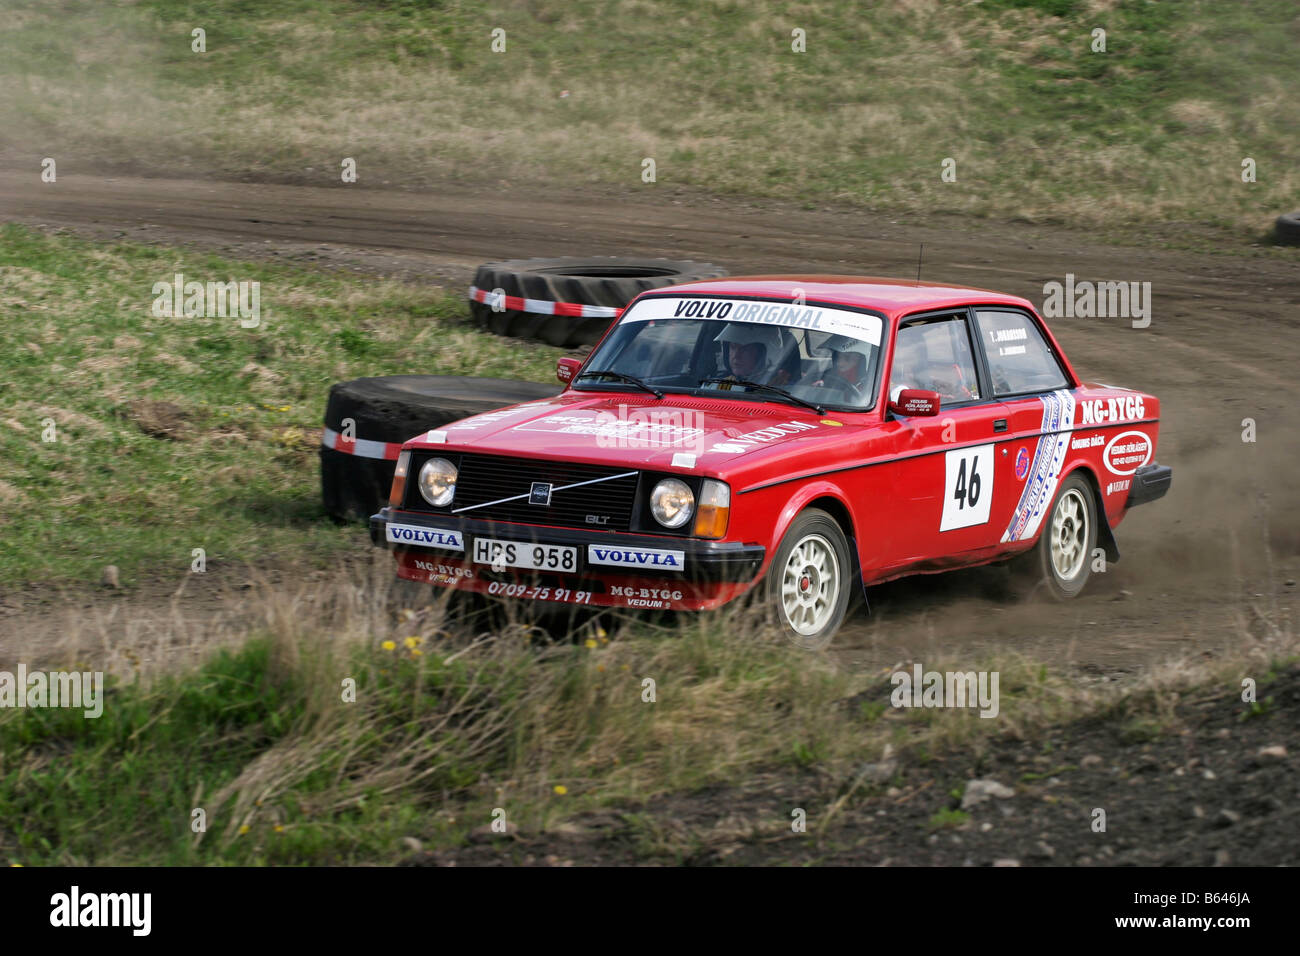 Volvo rally car in a race Stock Photo - Alamy